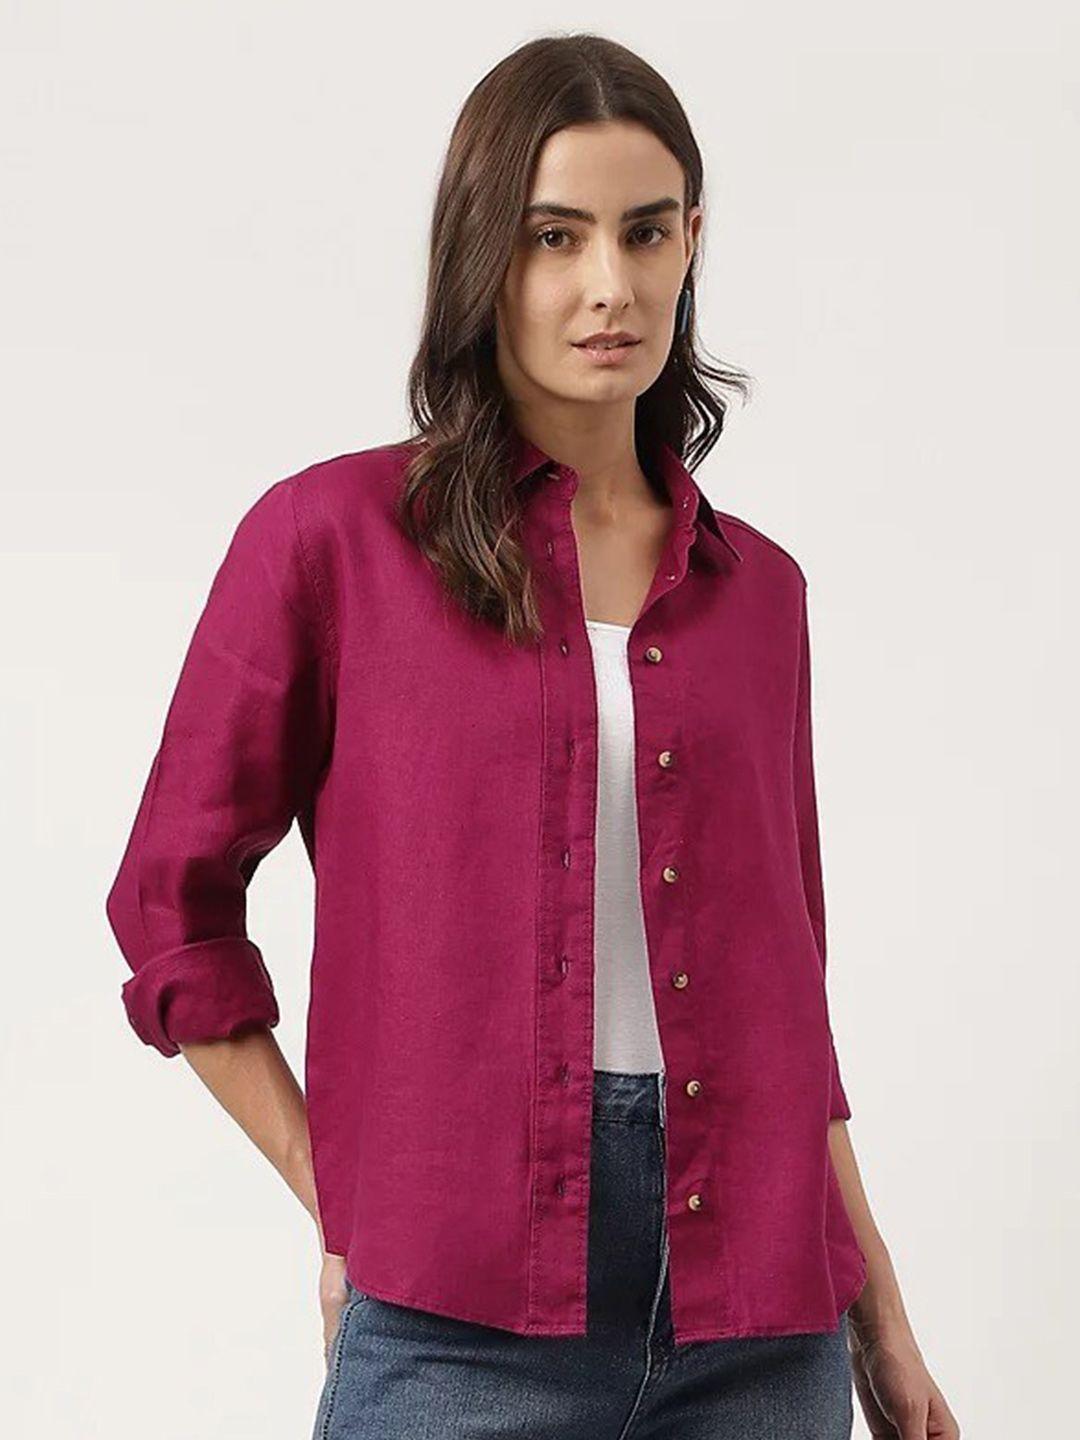 marks & spence opaque casual shirt